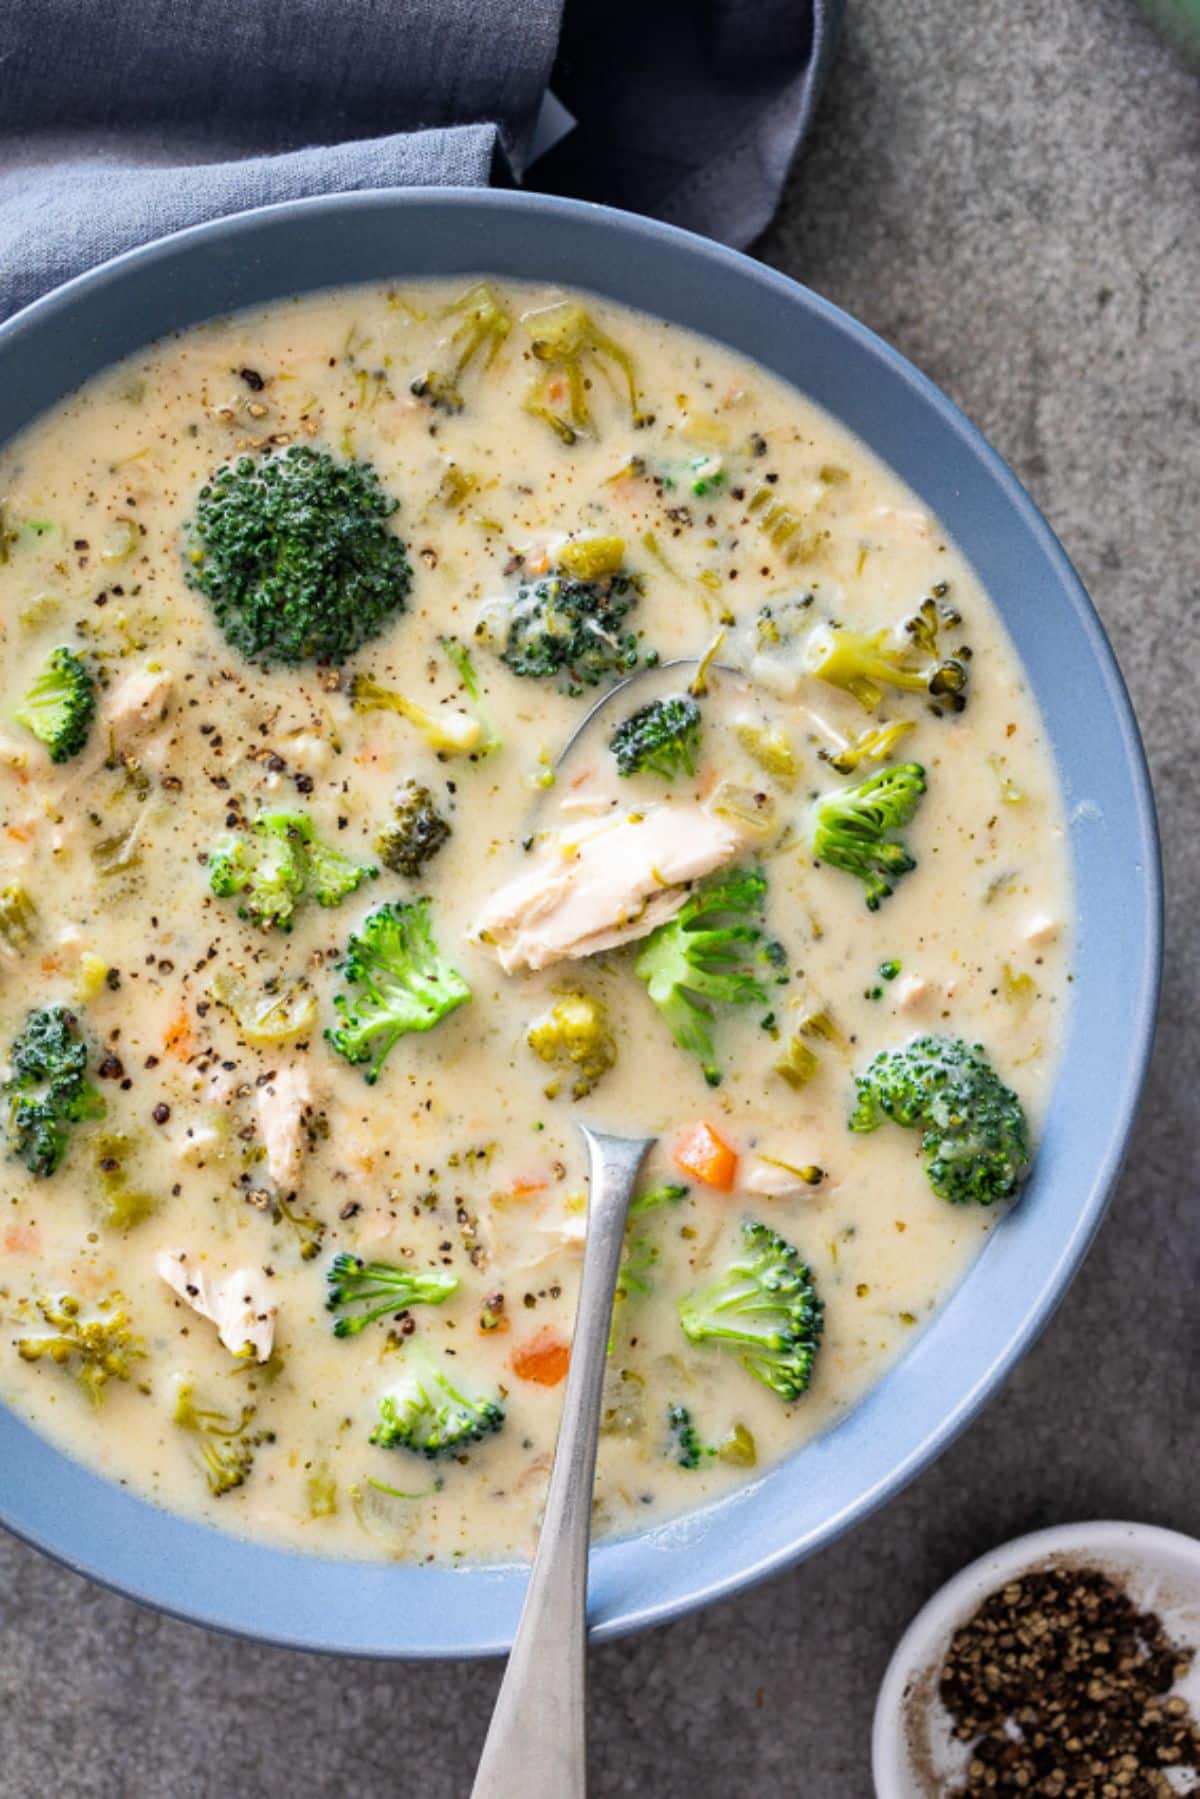 Creamy Healthy Chicken Broccoli Soupin a blue bowl with a spoon.